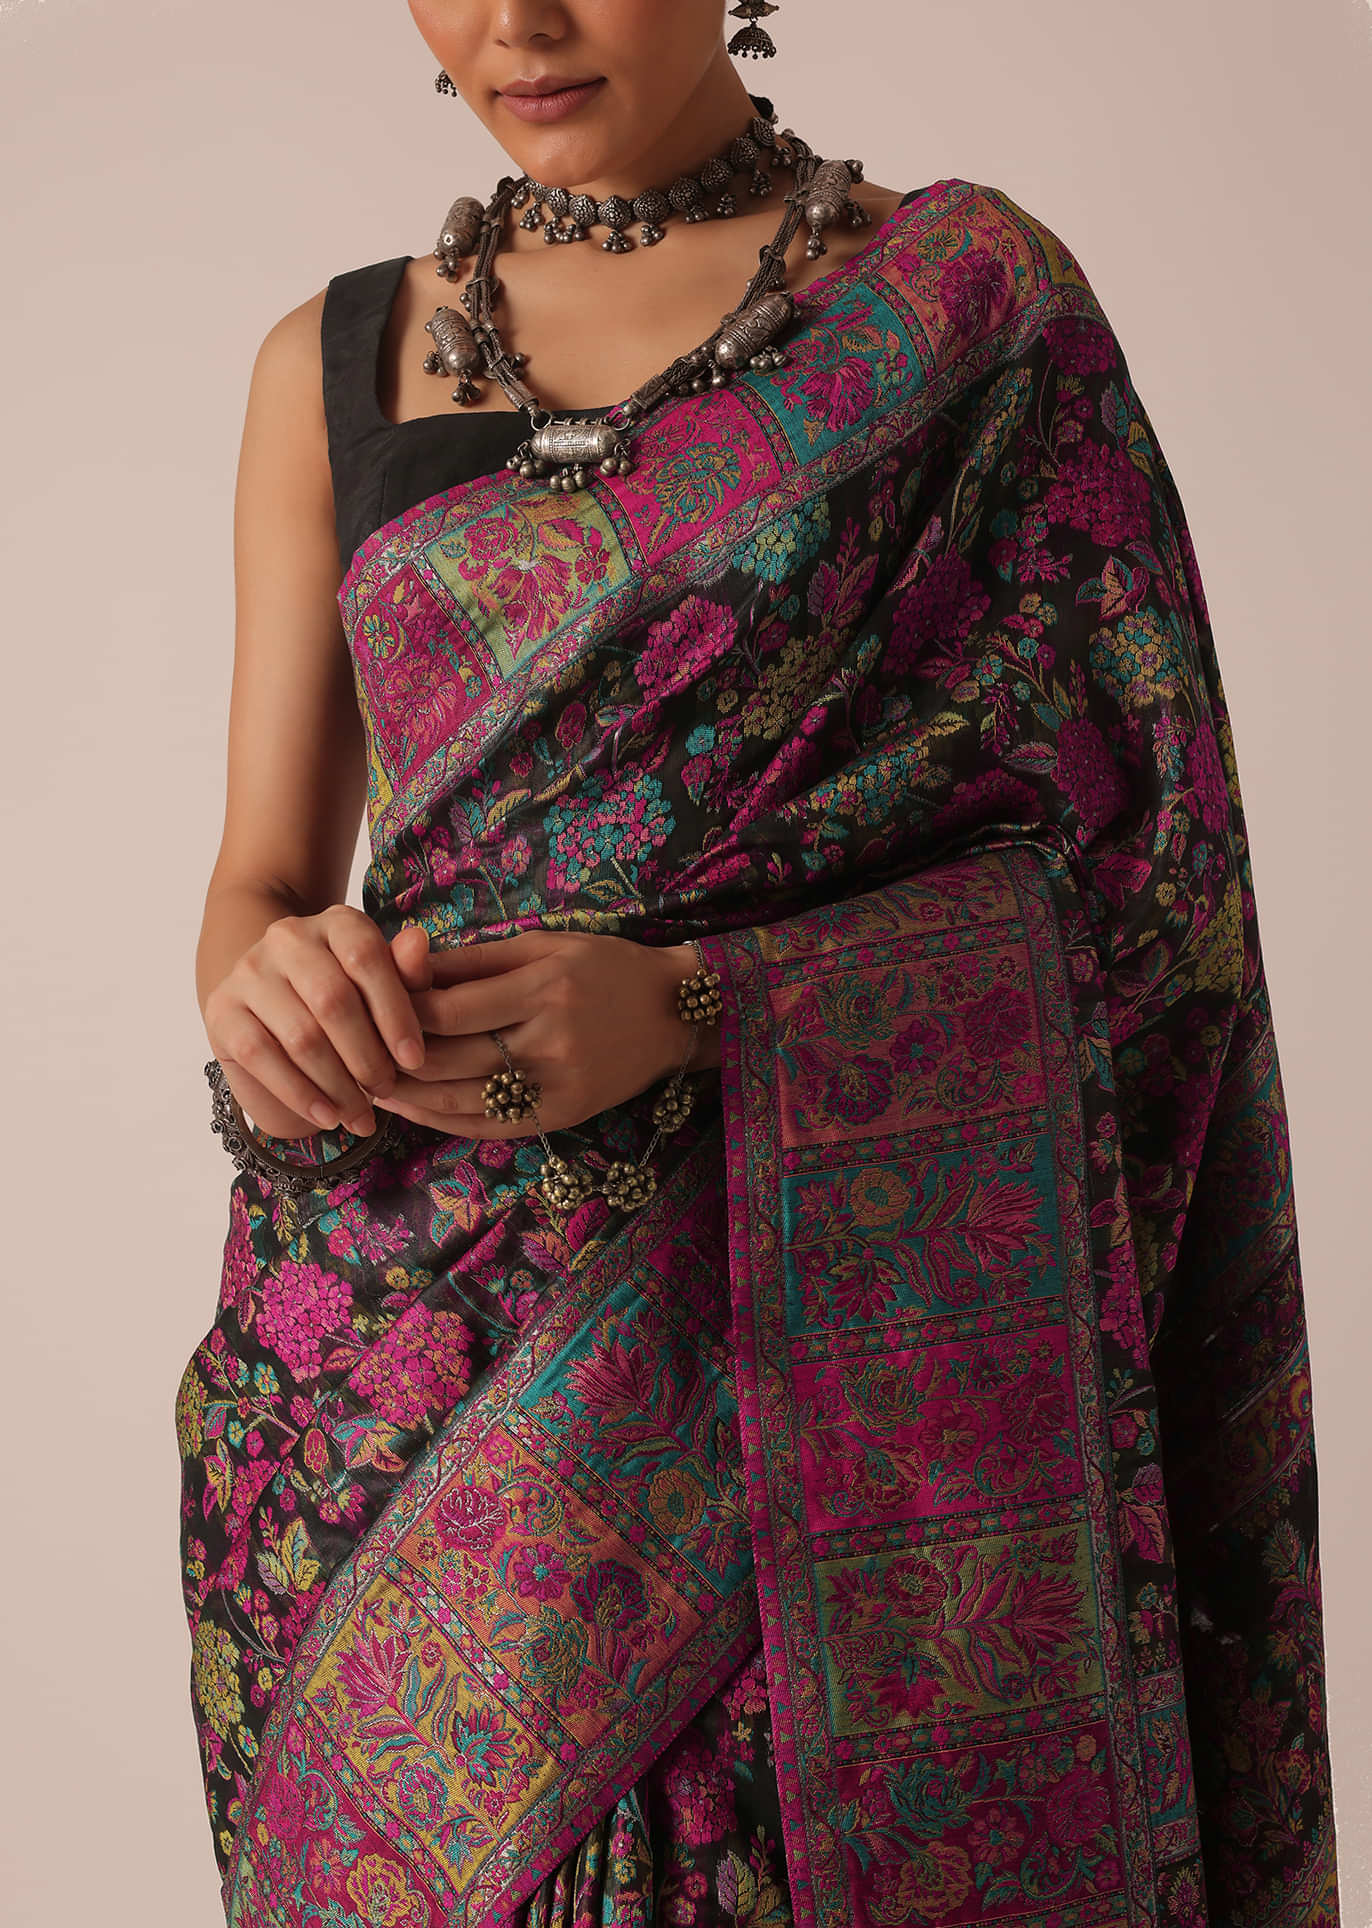 Wedding saree you'll love for Indian traditional rituals - Rani boutique